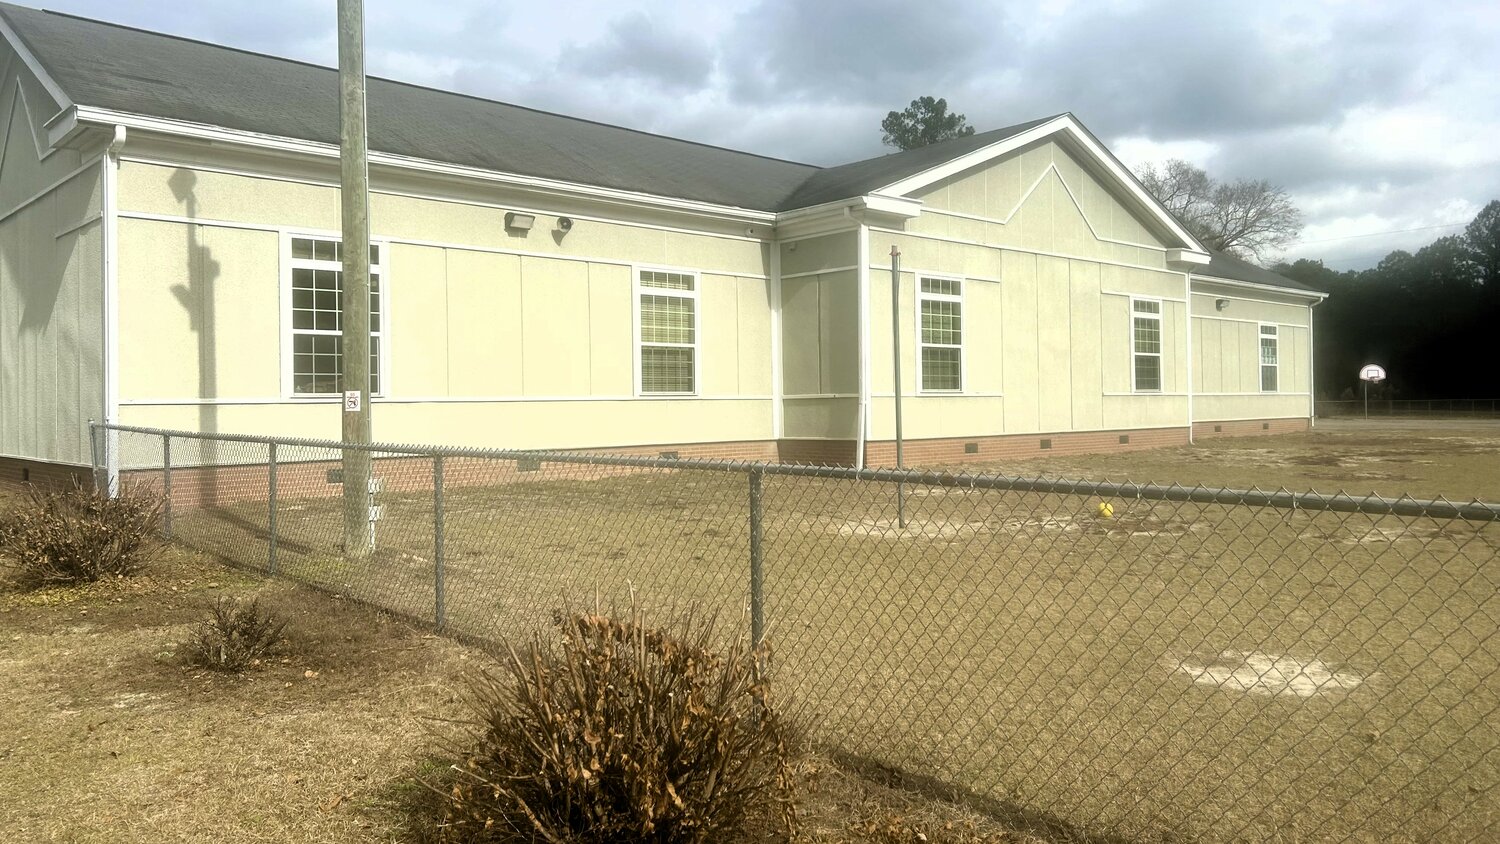 A side view of Beaver Dam Elementary School shows window exteriors and timber-framing that display signs of lead paint. The school district has said it is working with the health department to cover the hazardous areas.